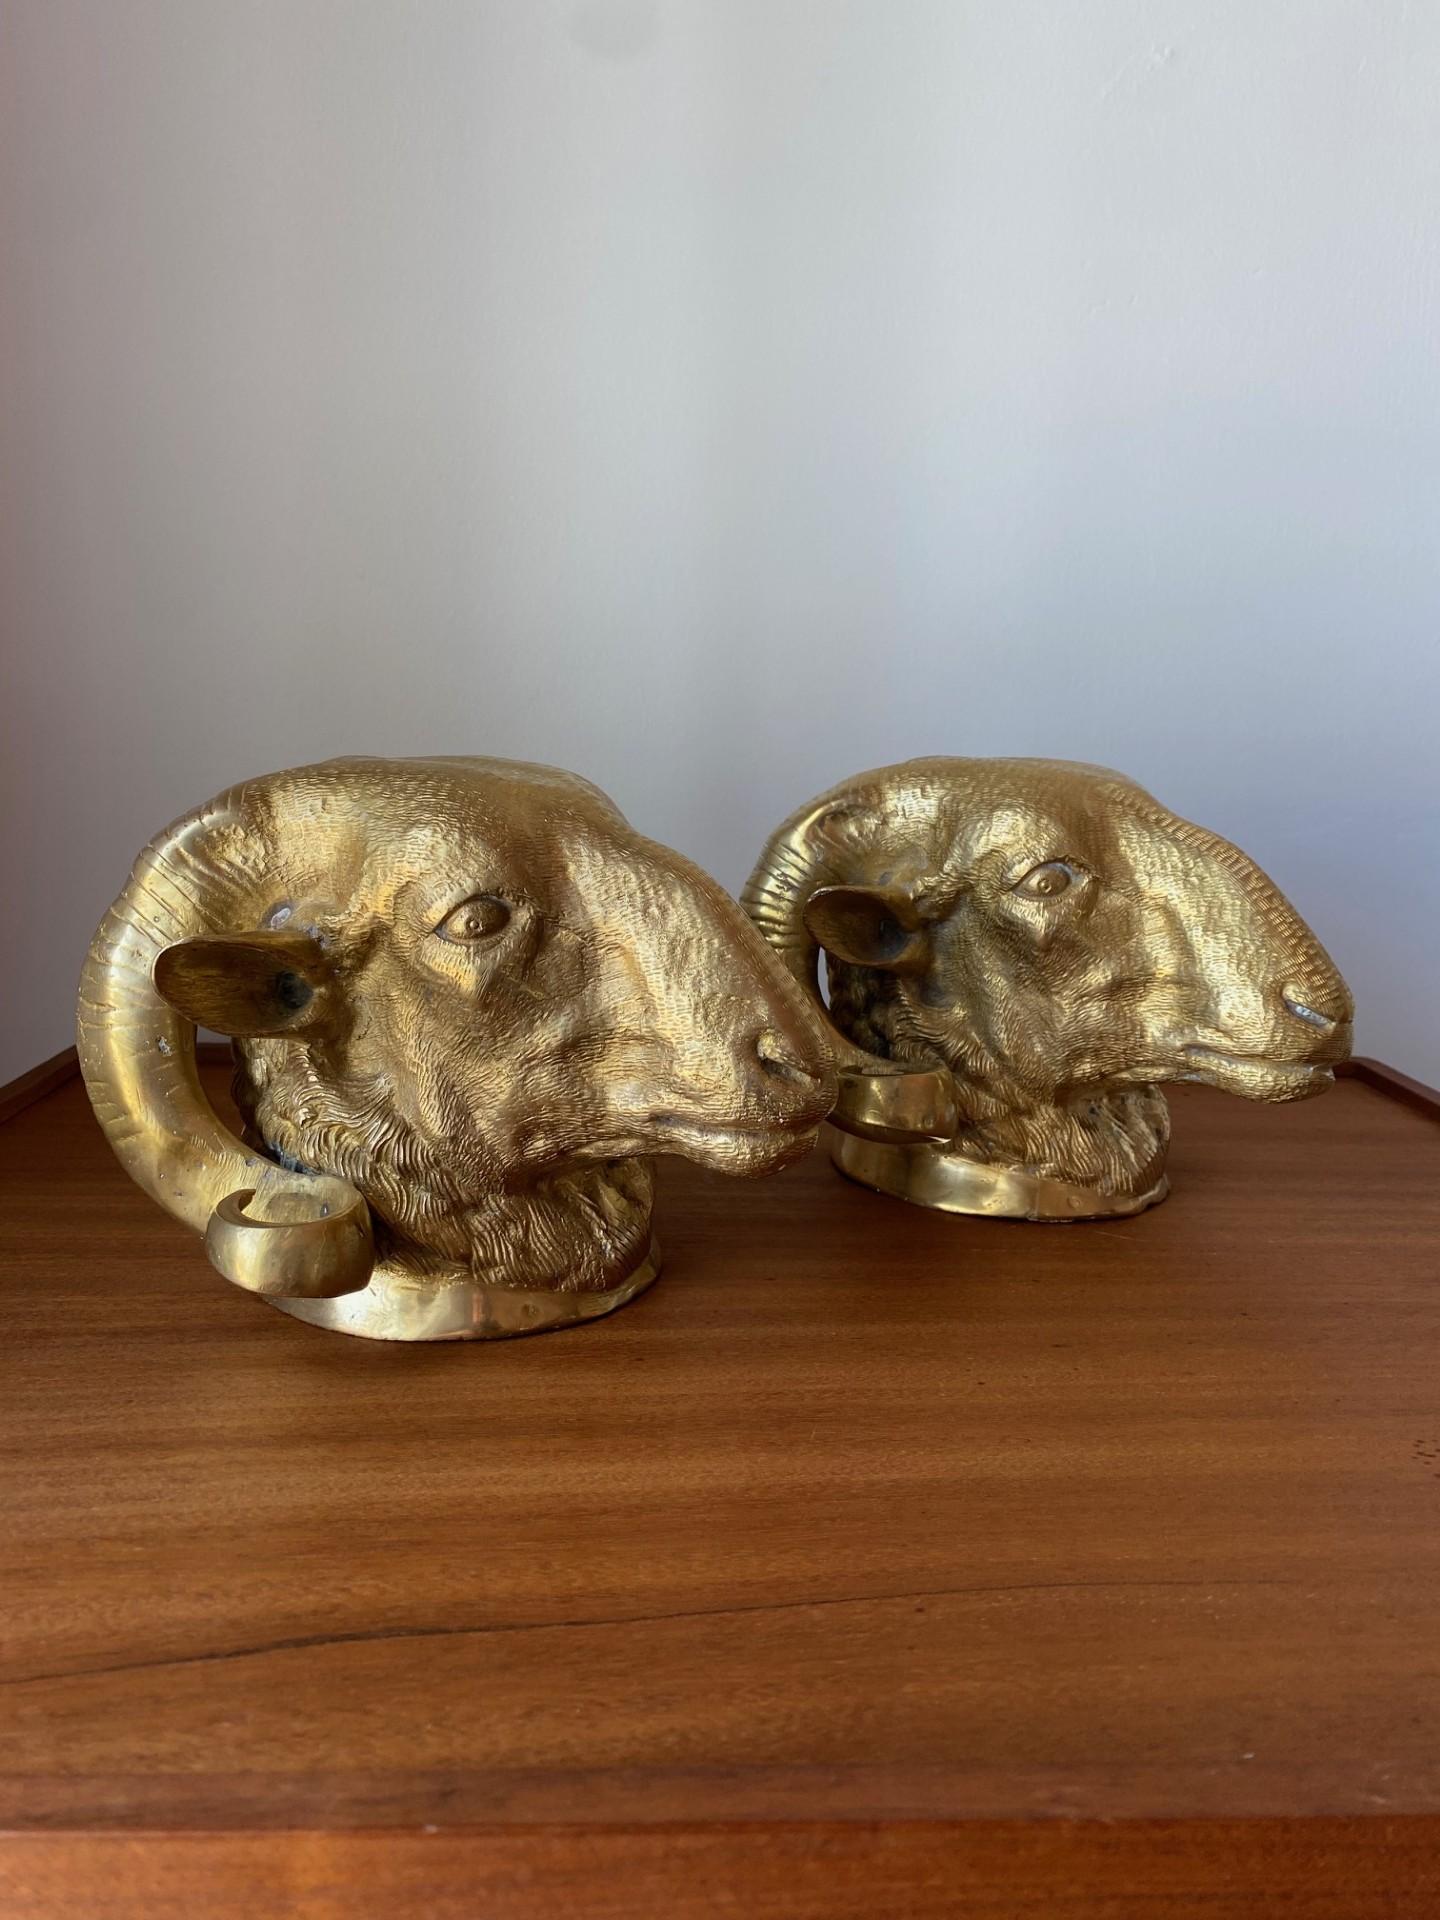 Impressive pair of Italian patinated brass big horn ram's head sculptures featuring long curled horns and dramatic neoclassical styling. These pieces stand out with Intricate details and beautiful craftsmanship. The artistry of movement develops in